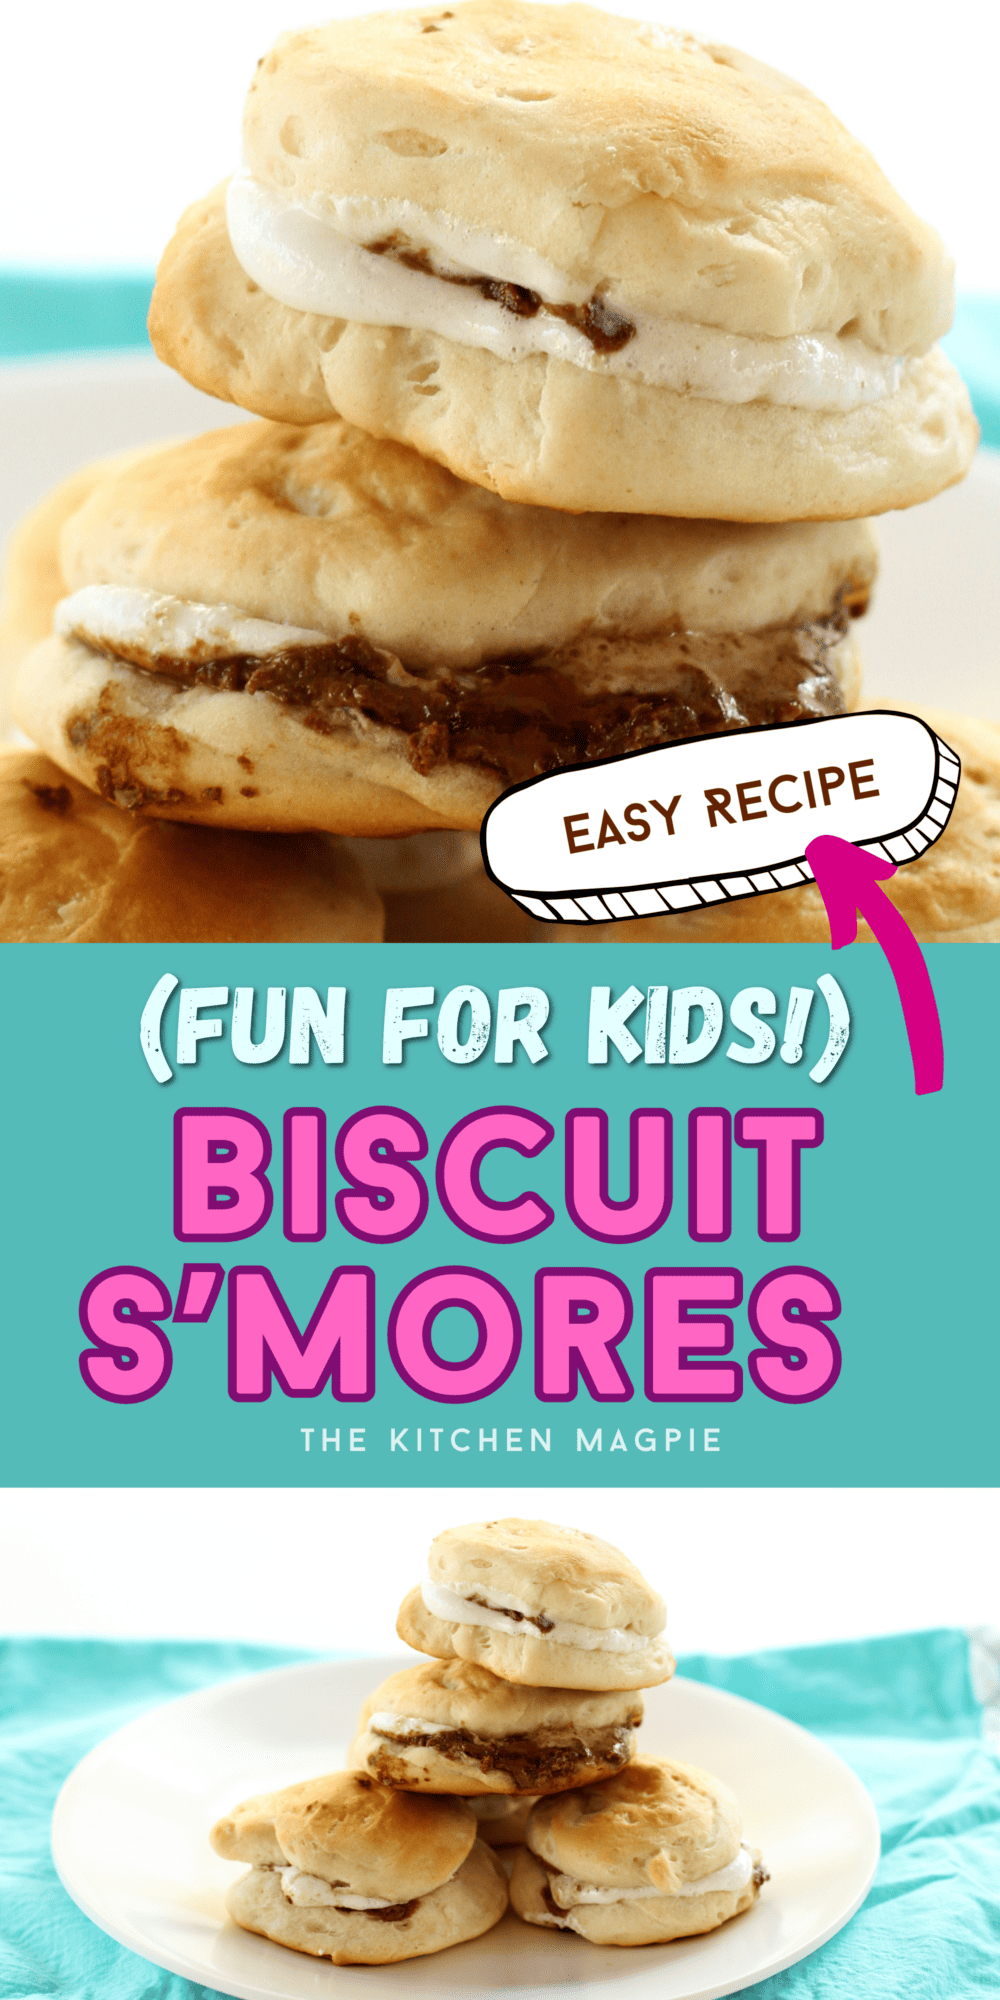 These Biscuit S’Mores are only three ingredients and perfect for camping!